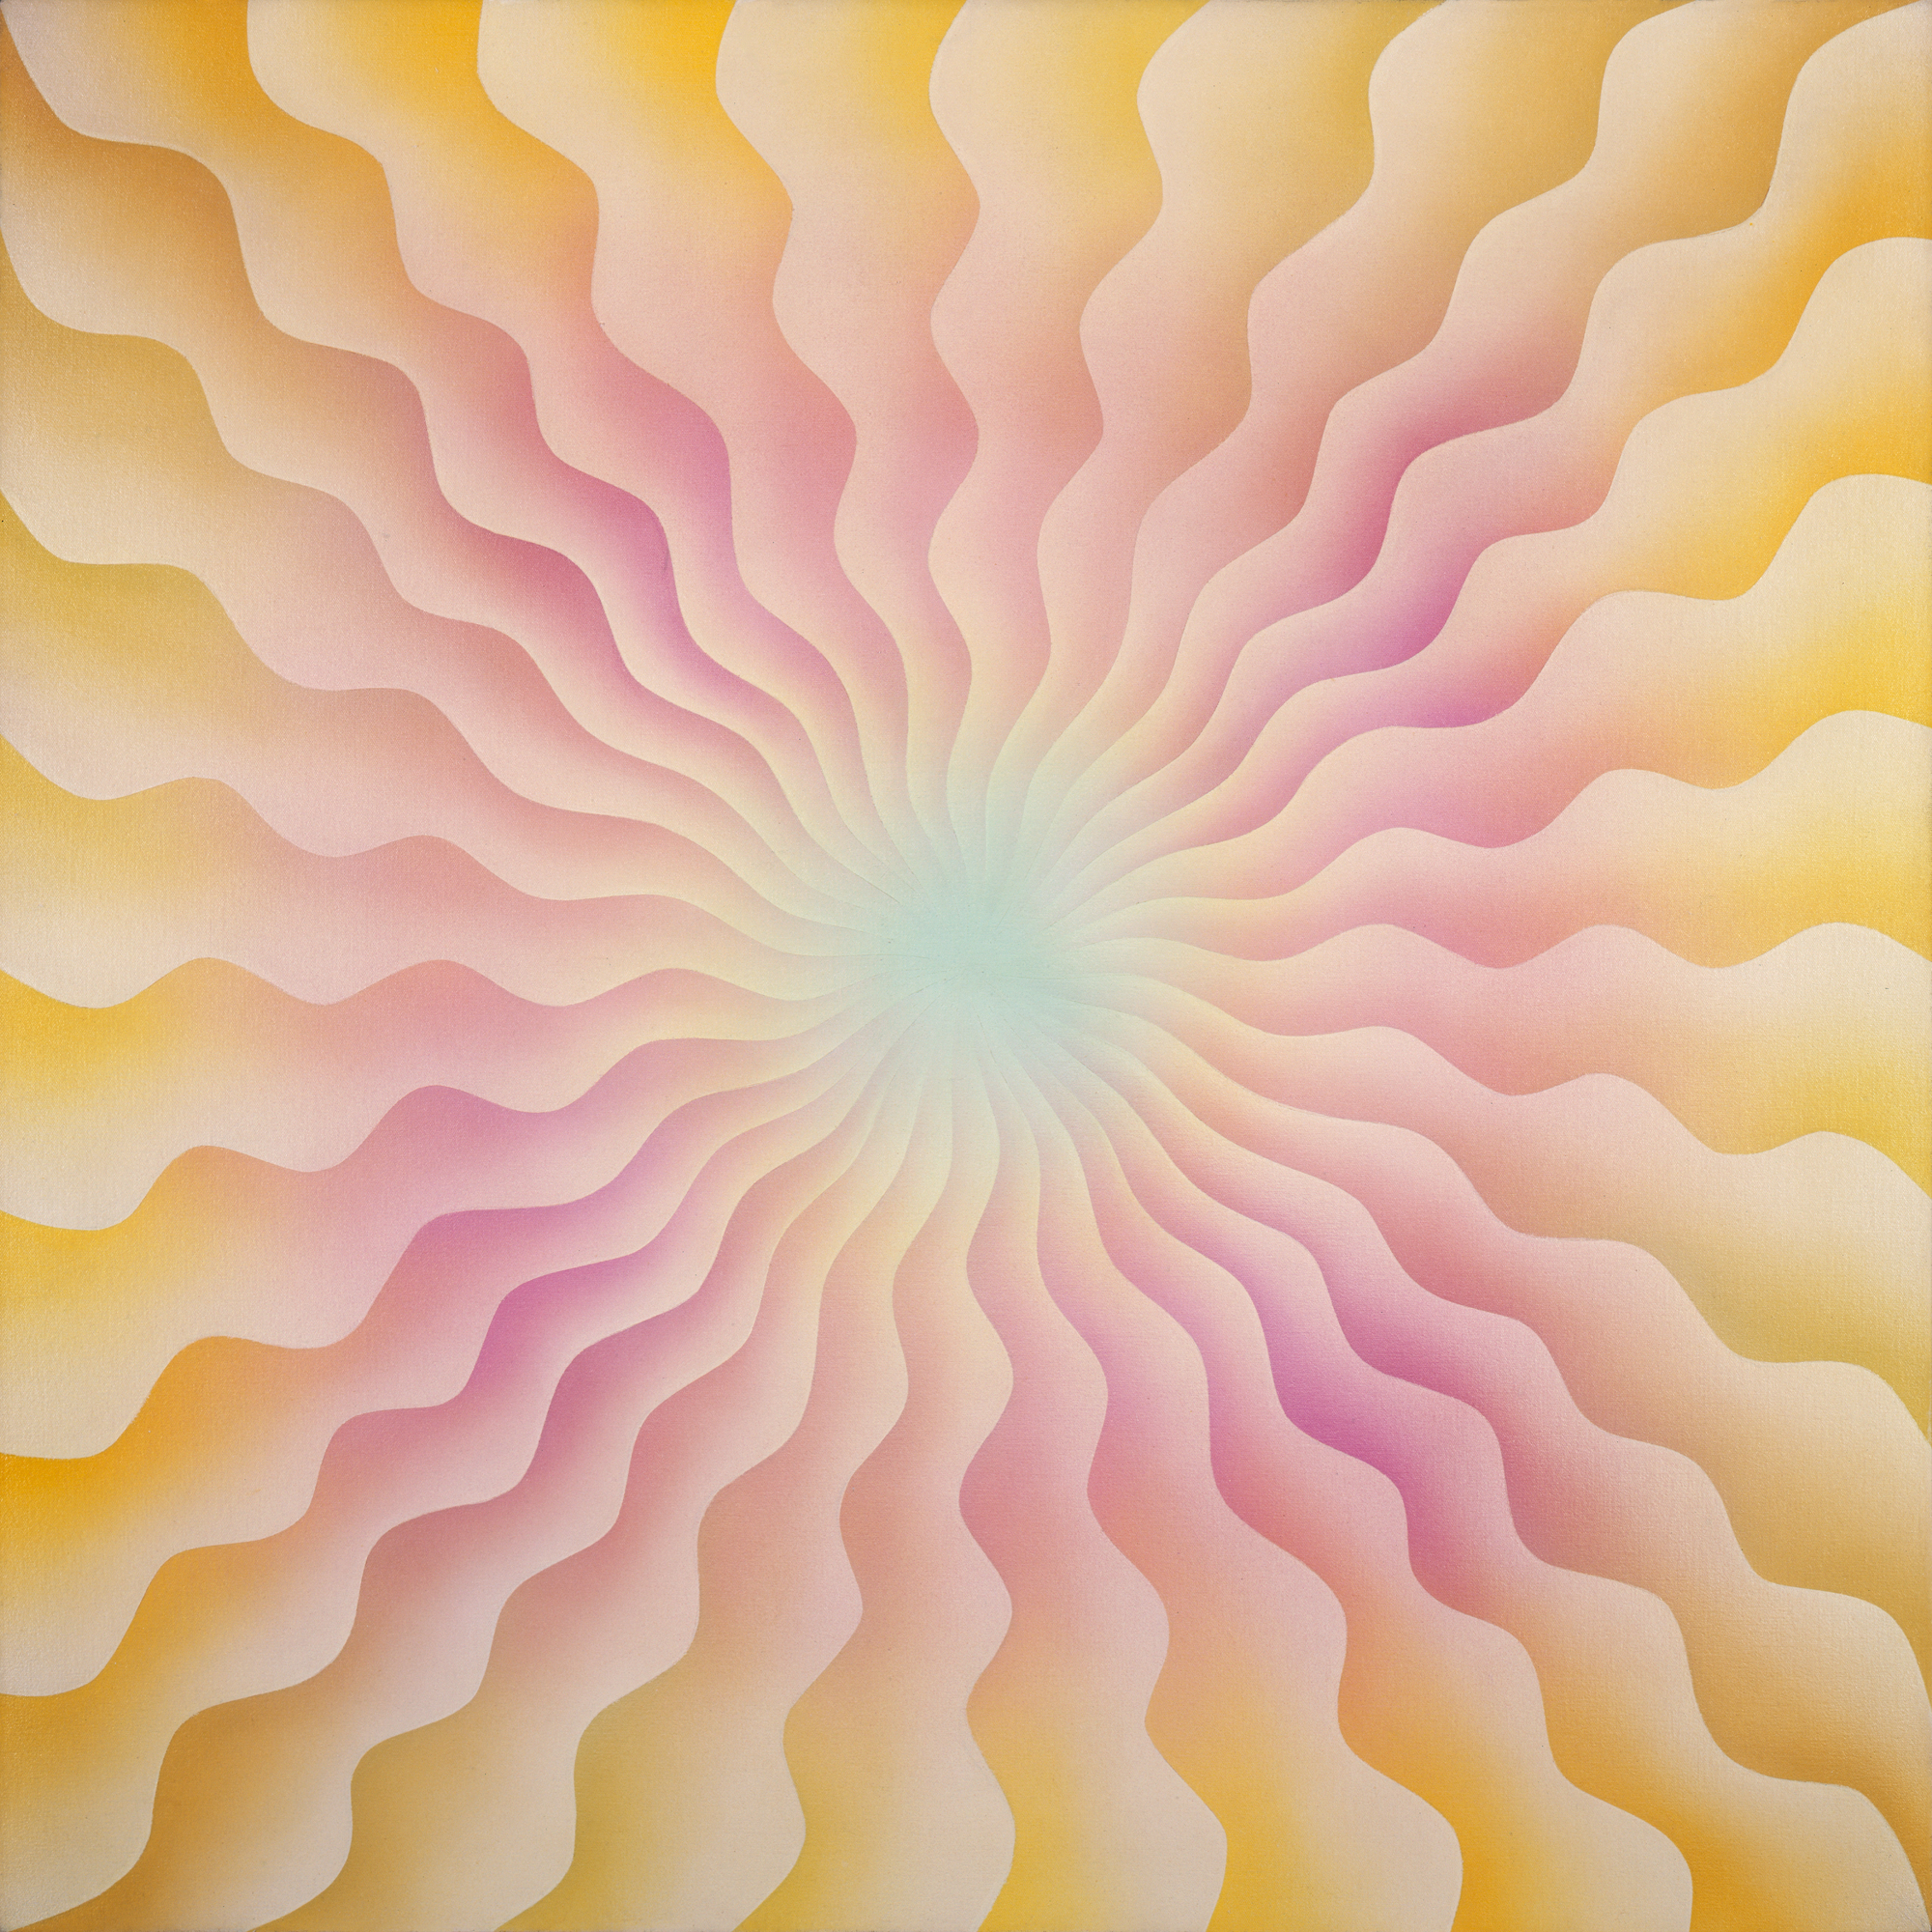 Judy Chicago, Marie Antoinette from the Great Ladies series, 1973, sprayed acrylic on canvas, 40 x 40 in., private collection.  © Judy Chicago/Artists Rights Society (ARS), New York